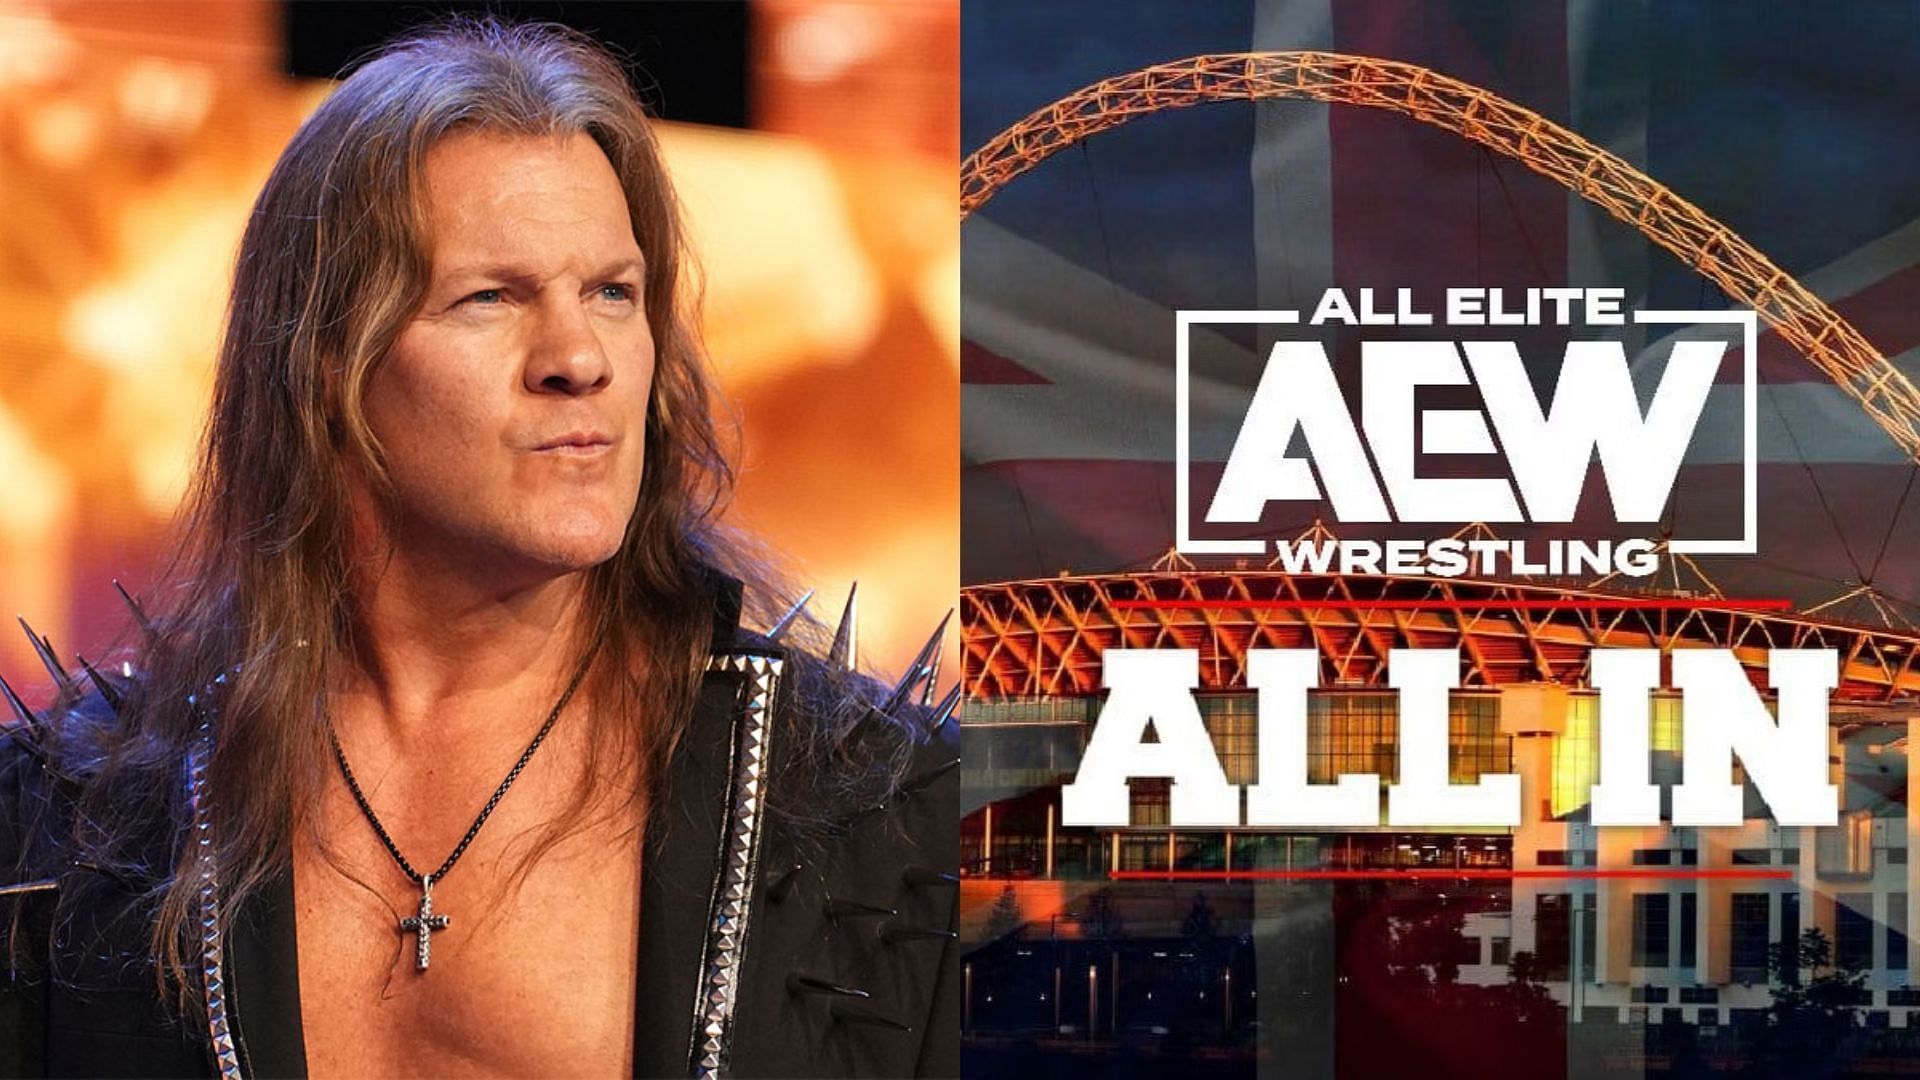 Chris Jericho faced Will Ospreay at AEW All In